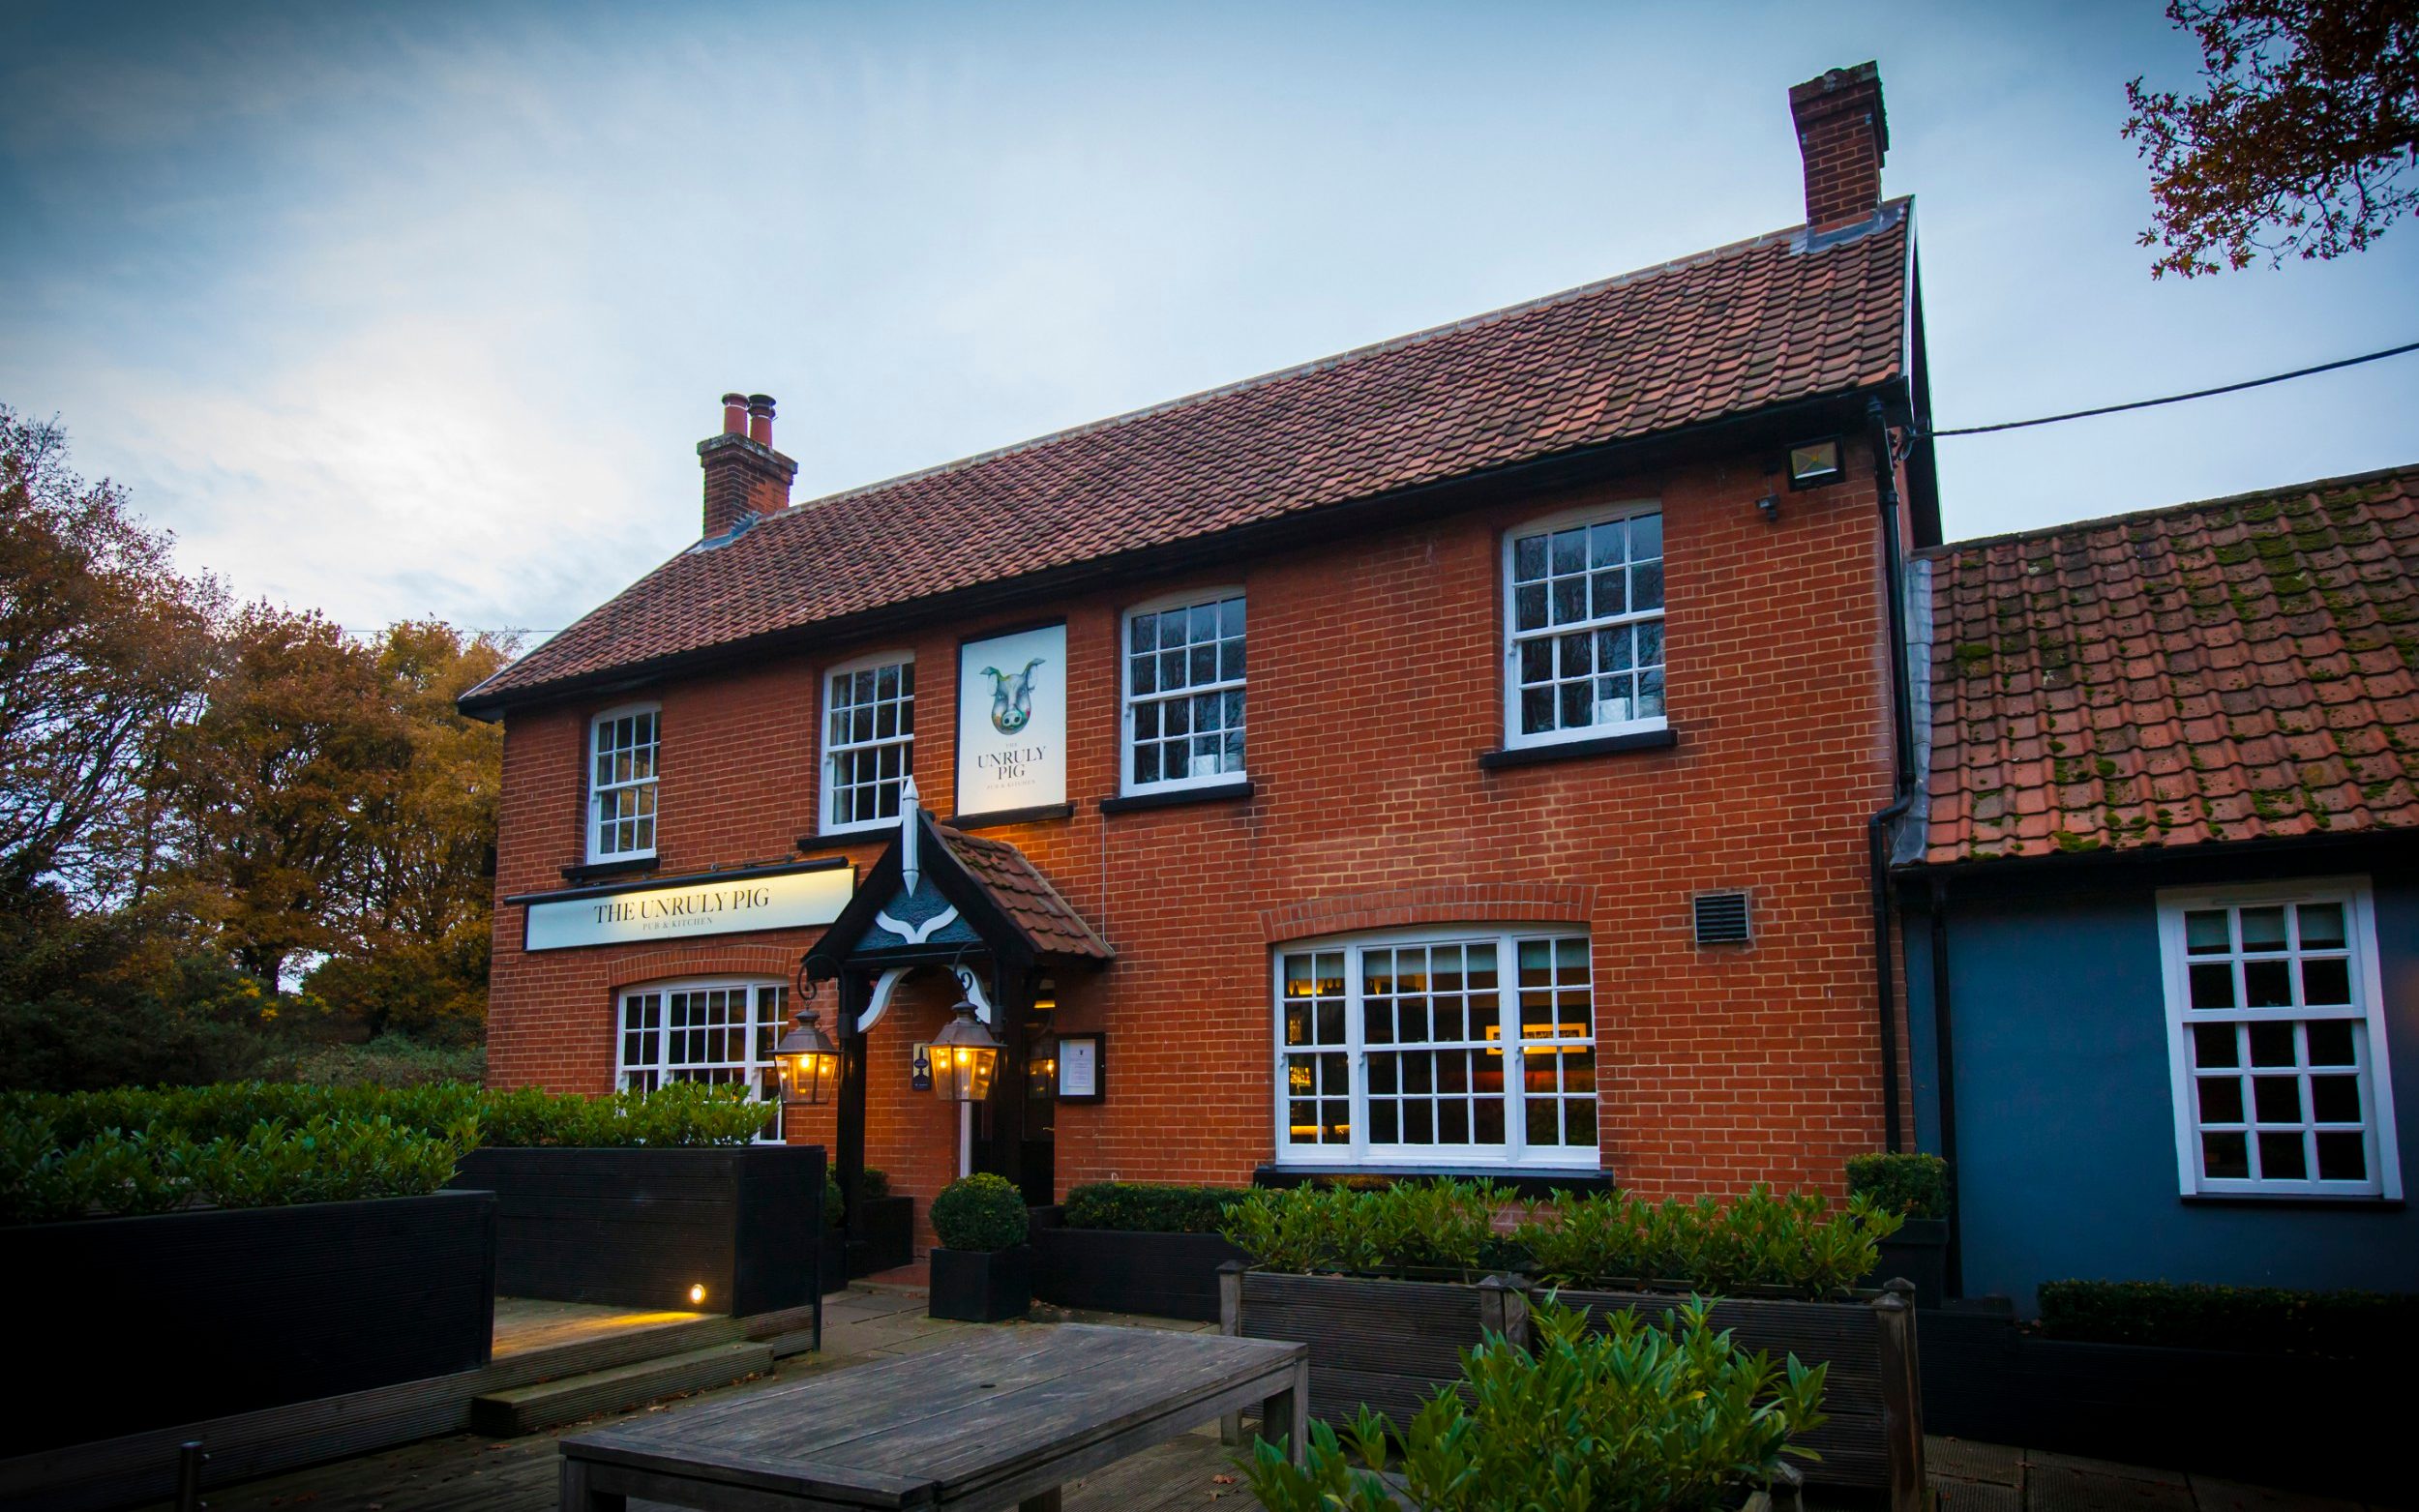 britain’s top 50 gastropubs revealed: suffolk boozer regains title with ‘seriously good, unfussy food’